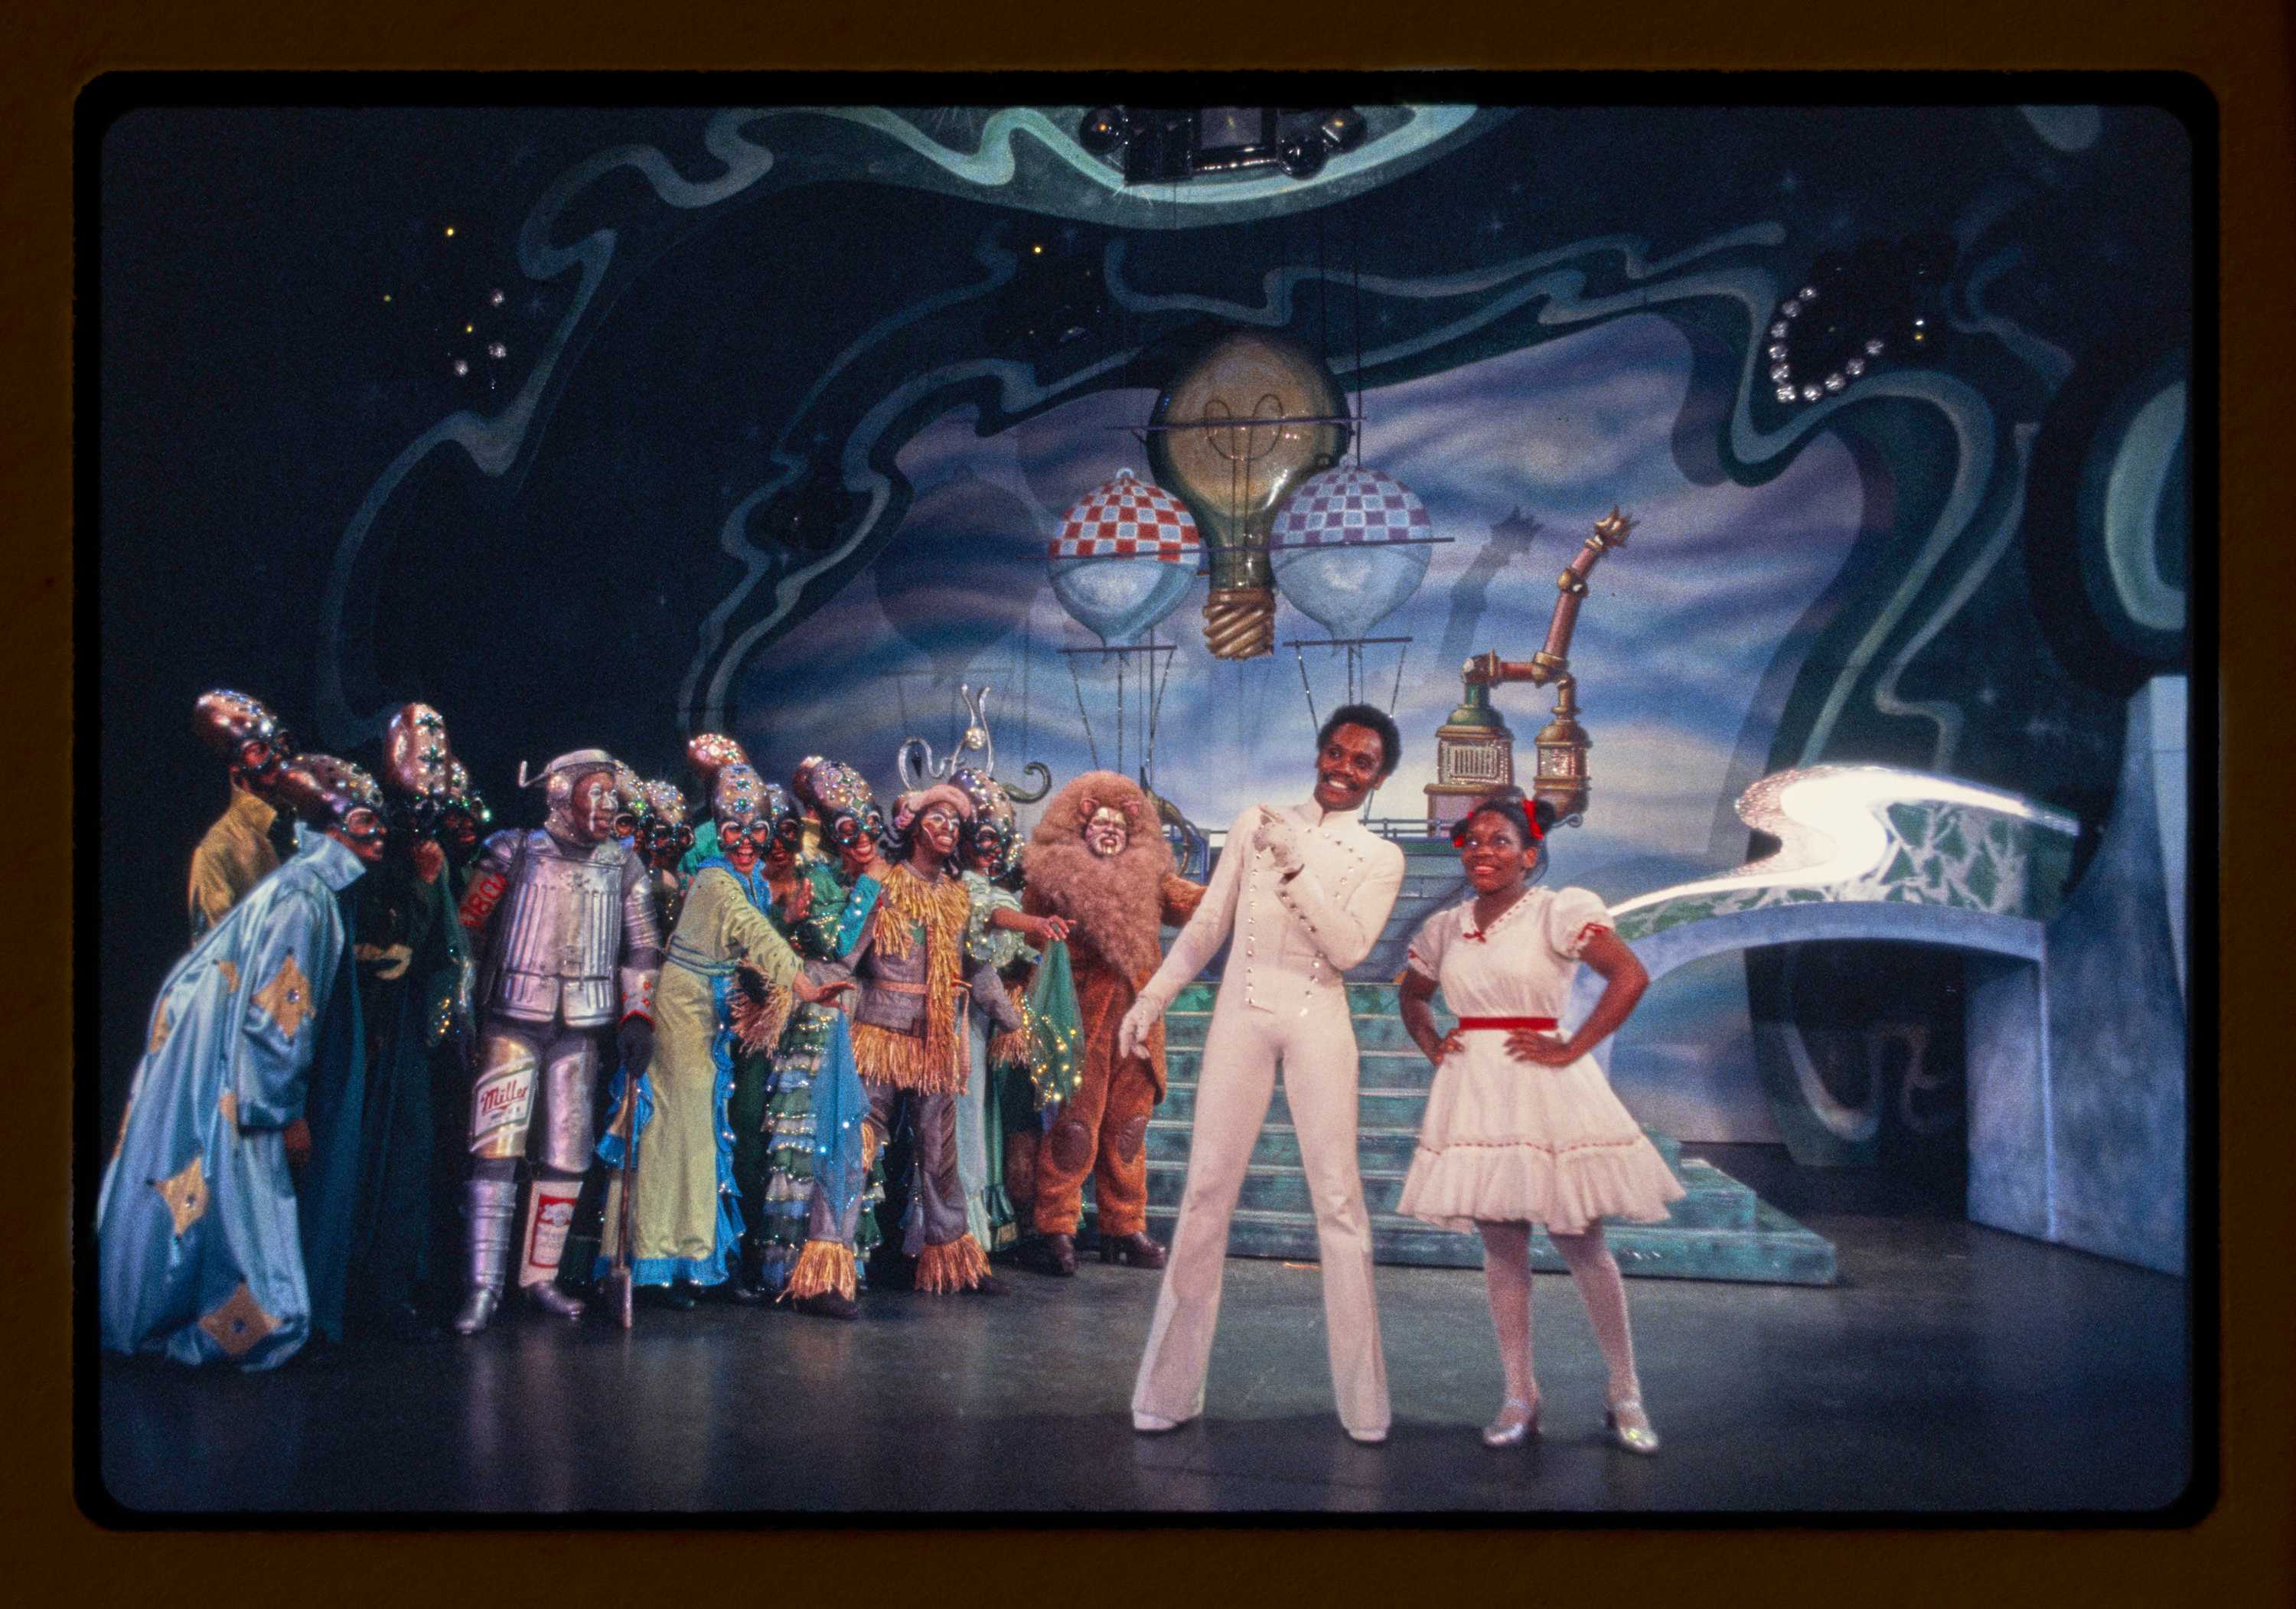 Two characters standing on the right side of the stage in front of other cast members in the Land Oz.